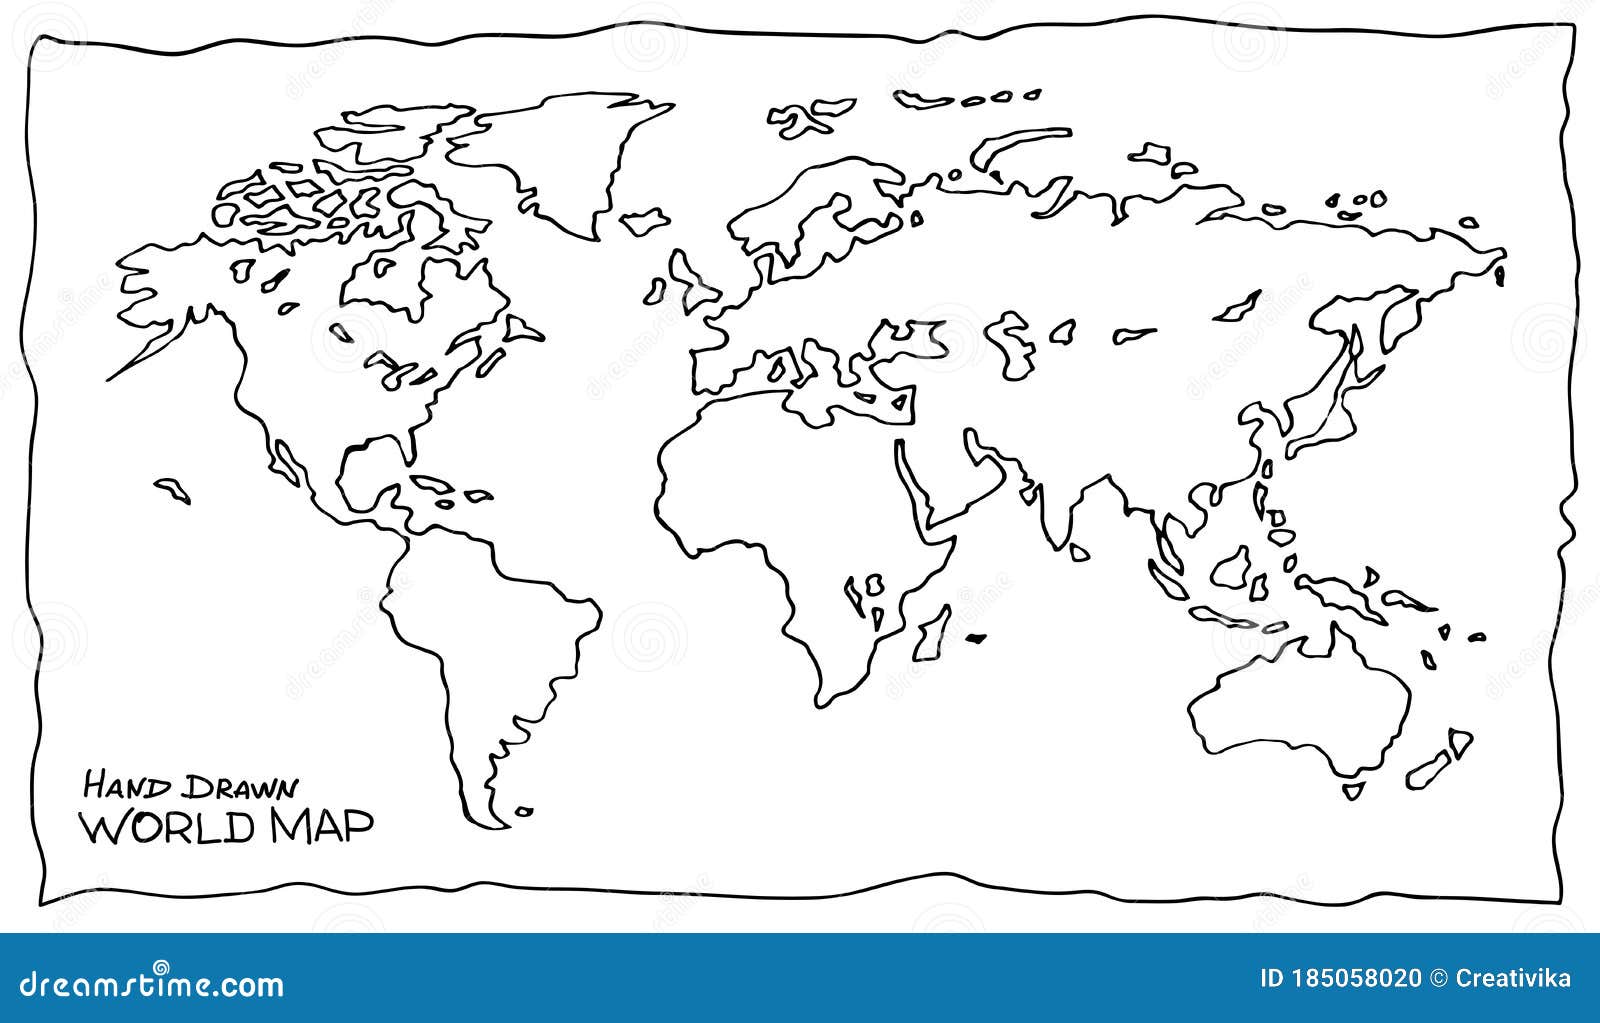 Hand Drawn World Map Drawing By Pencil Stock Vector